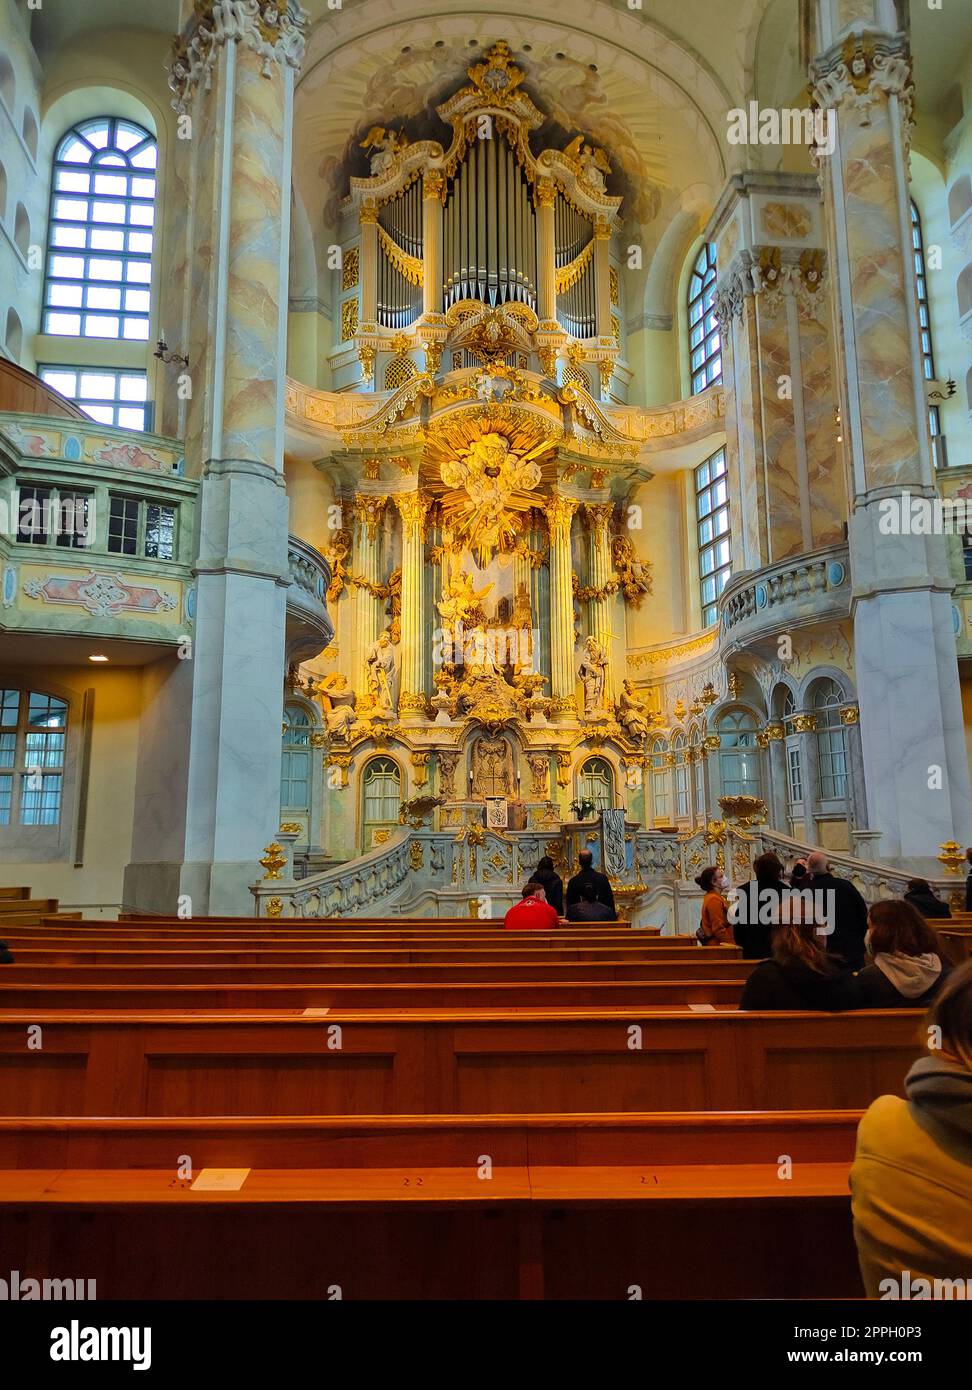 Pipe organ of Frauenkirche Lutheran church in Dresden city, Germany. Stock Photo